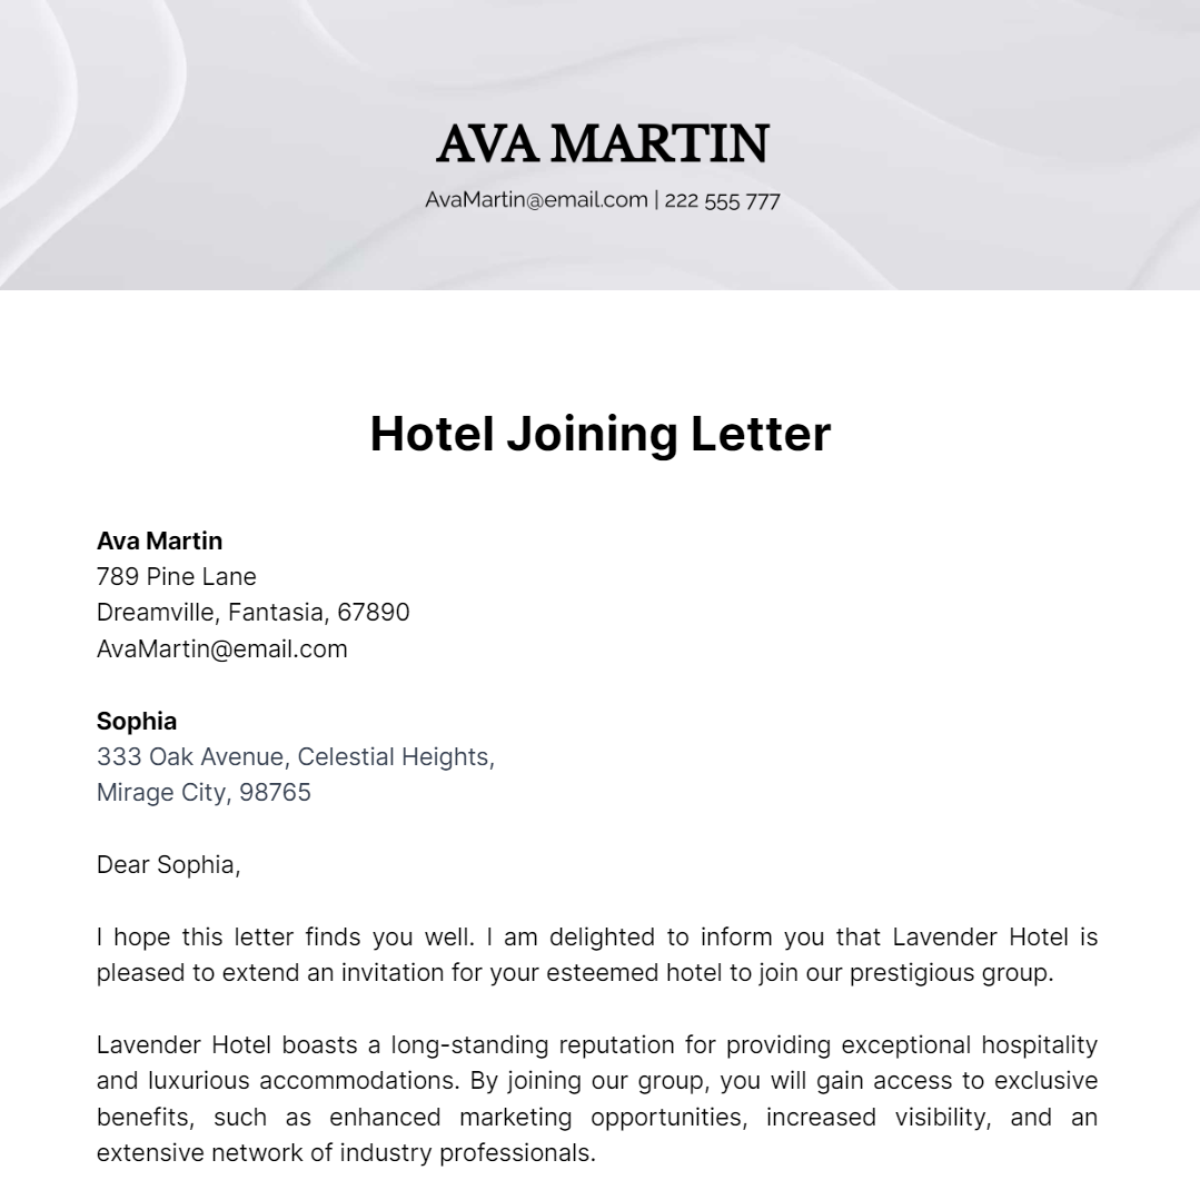 Hotel Joining Letter Template